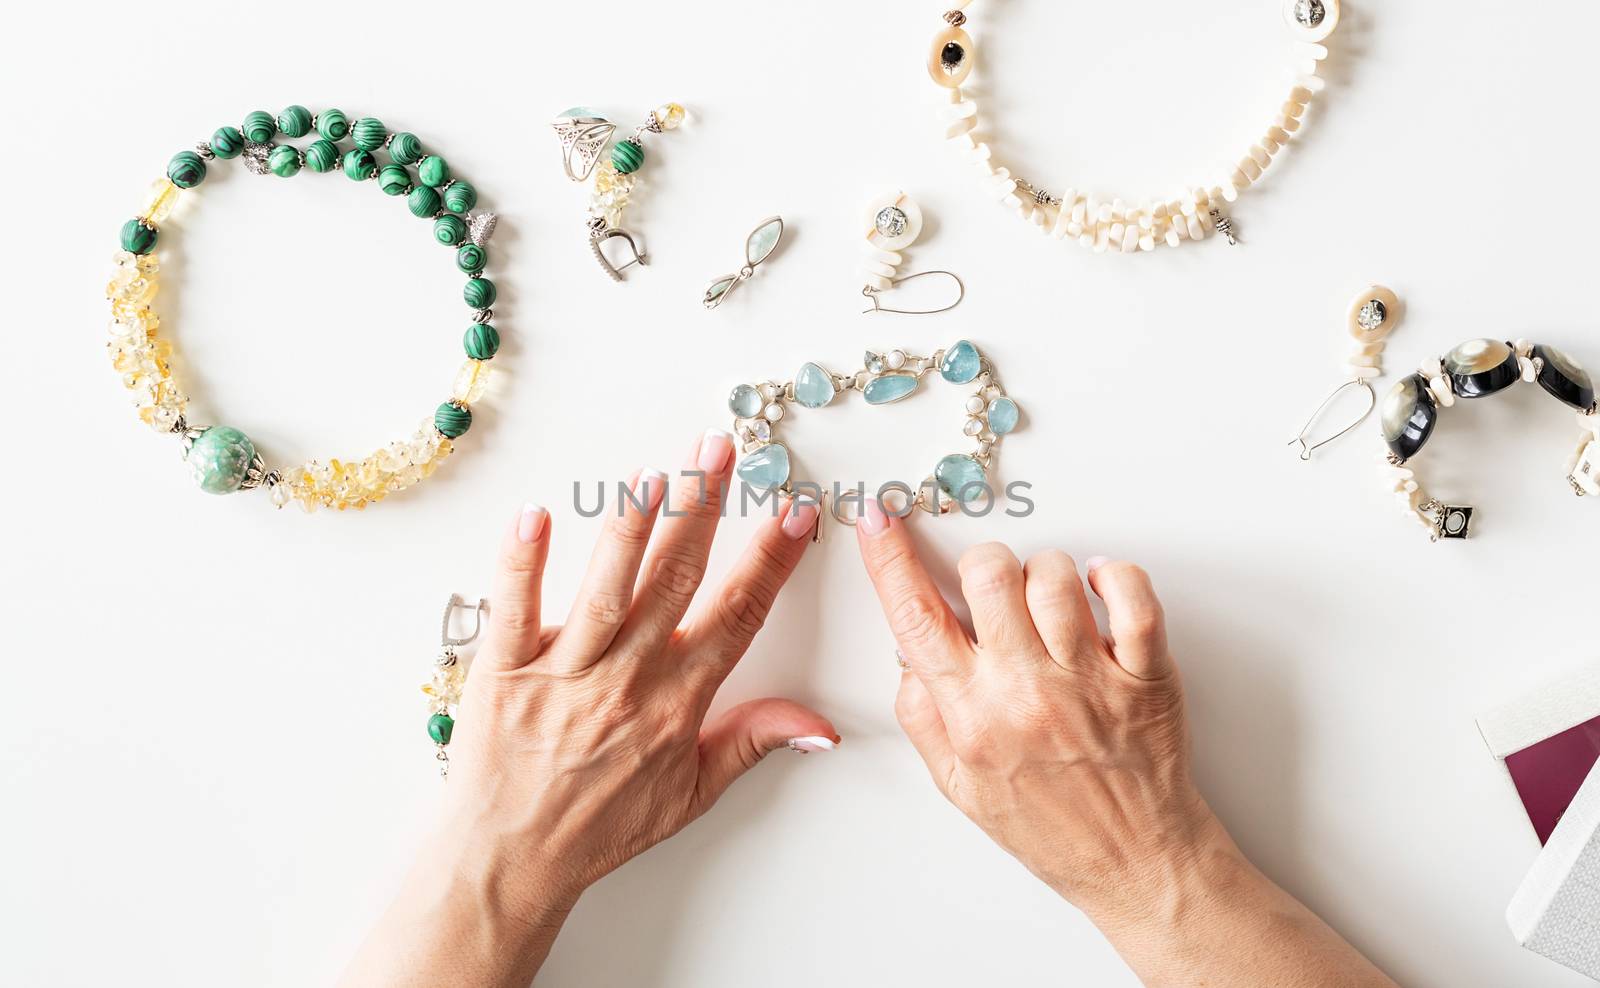 Hands of middle-aged woman touching various jewels top view by Desperada